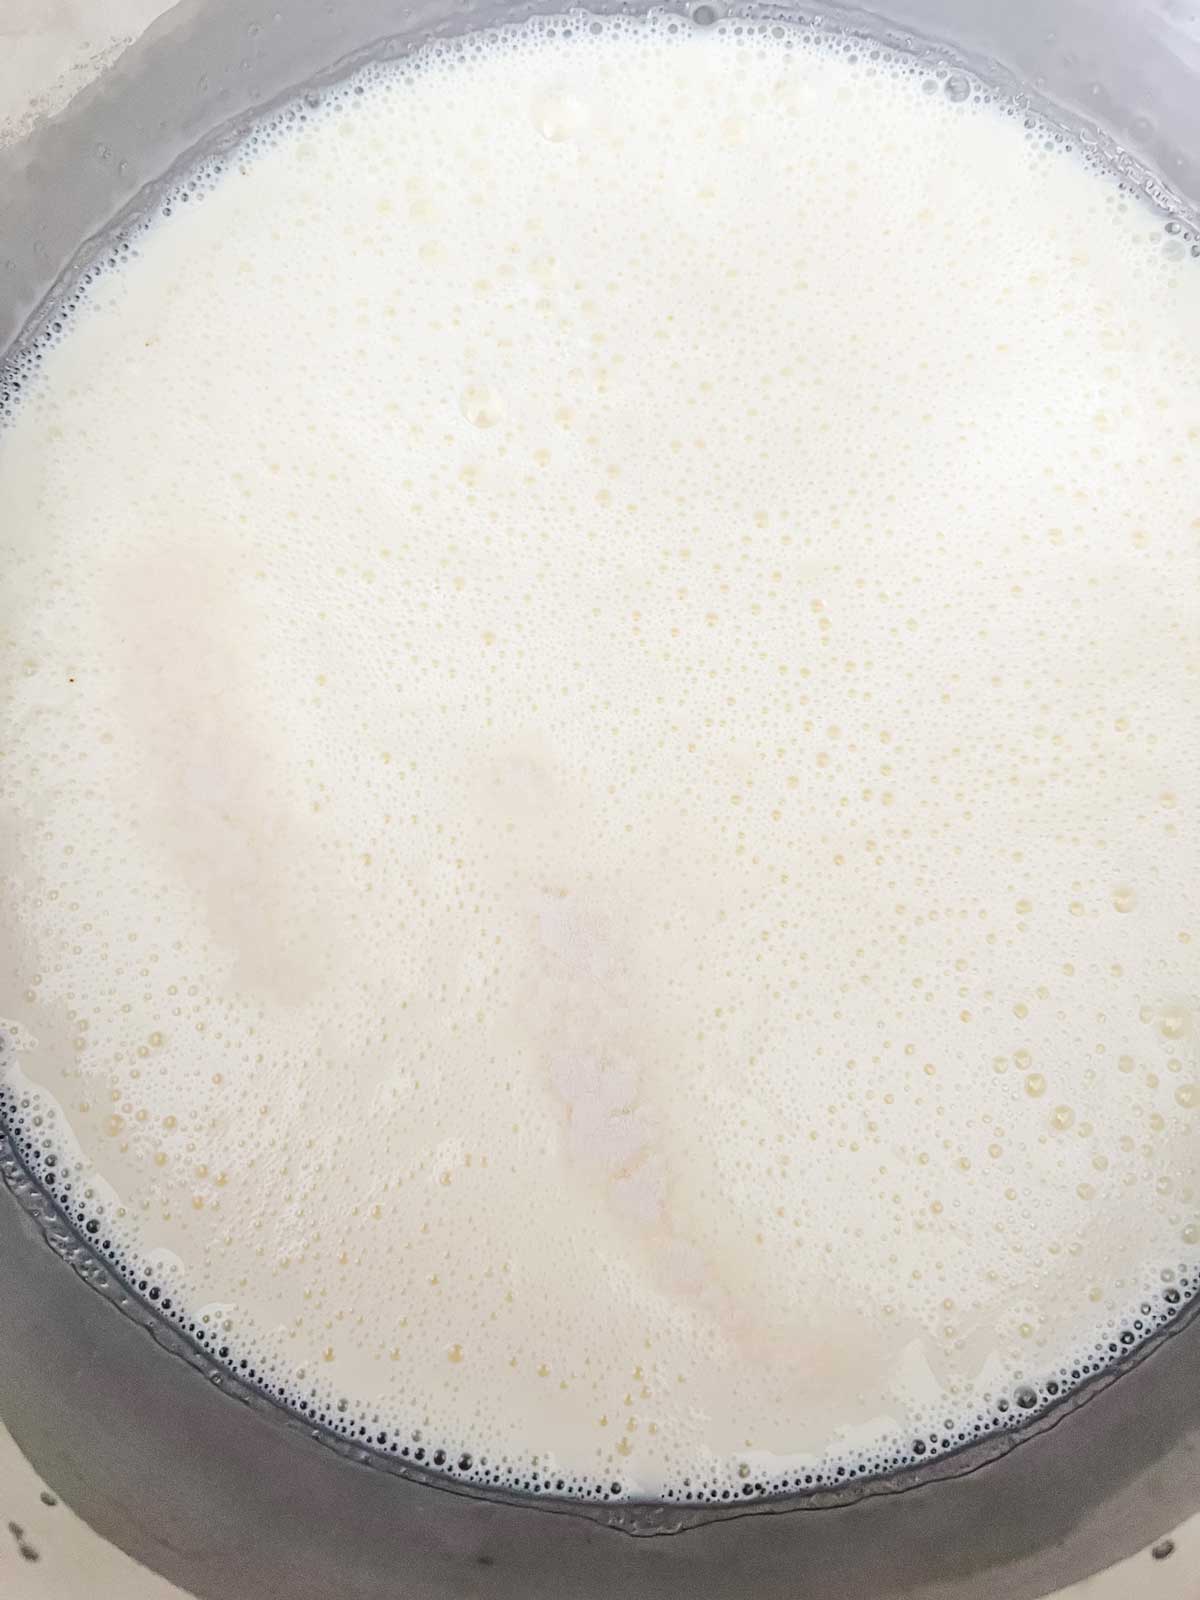 Cream and sweetener in a saucepan cooking.